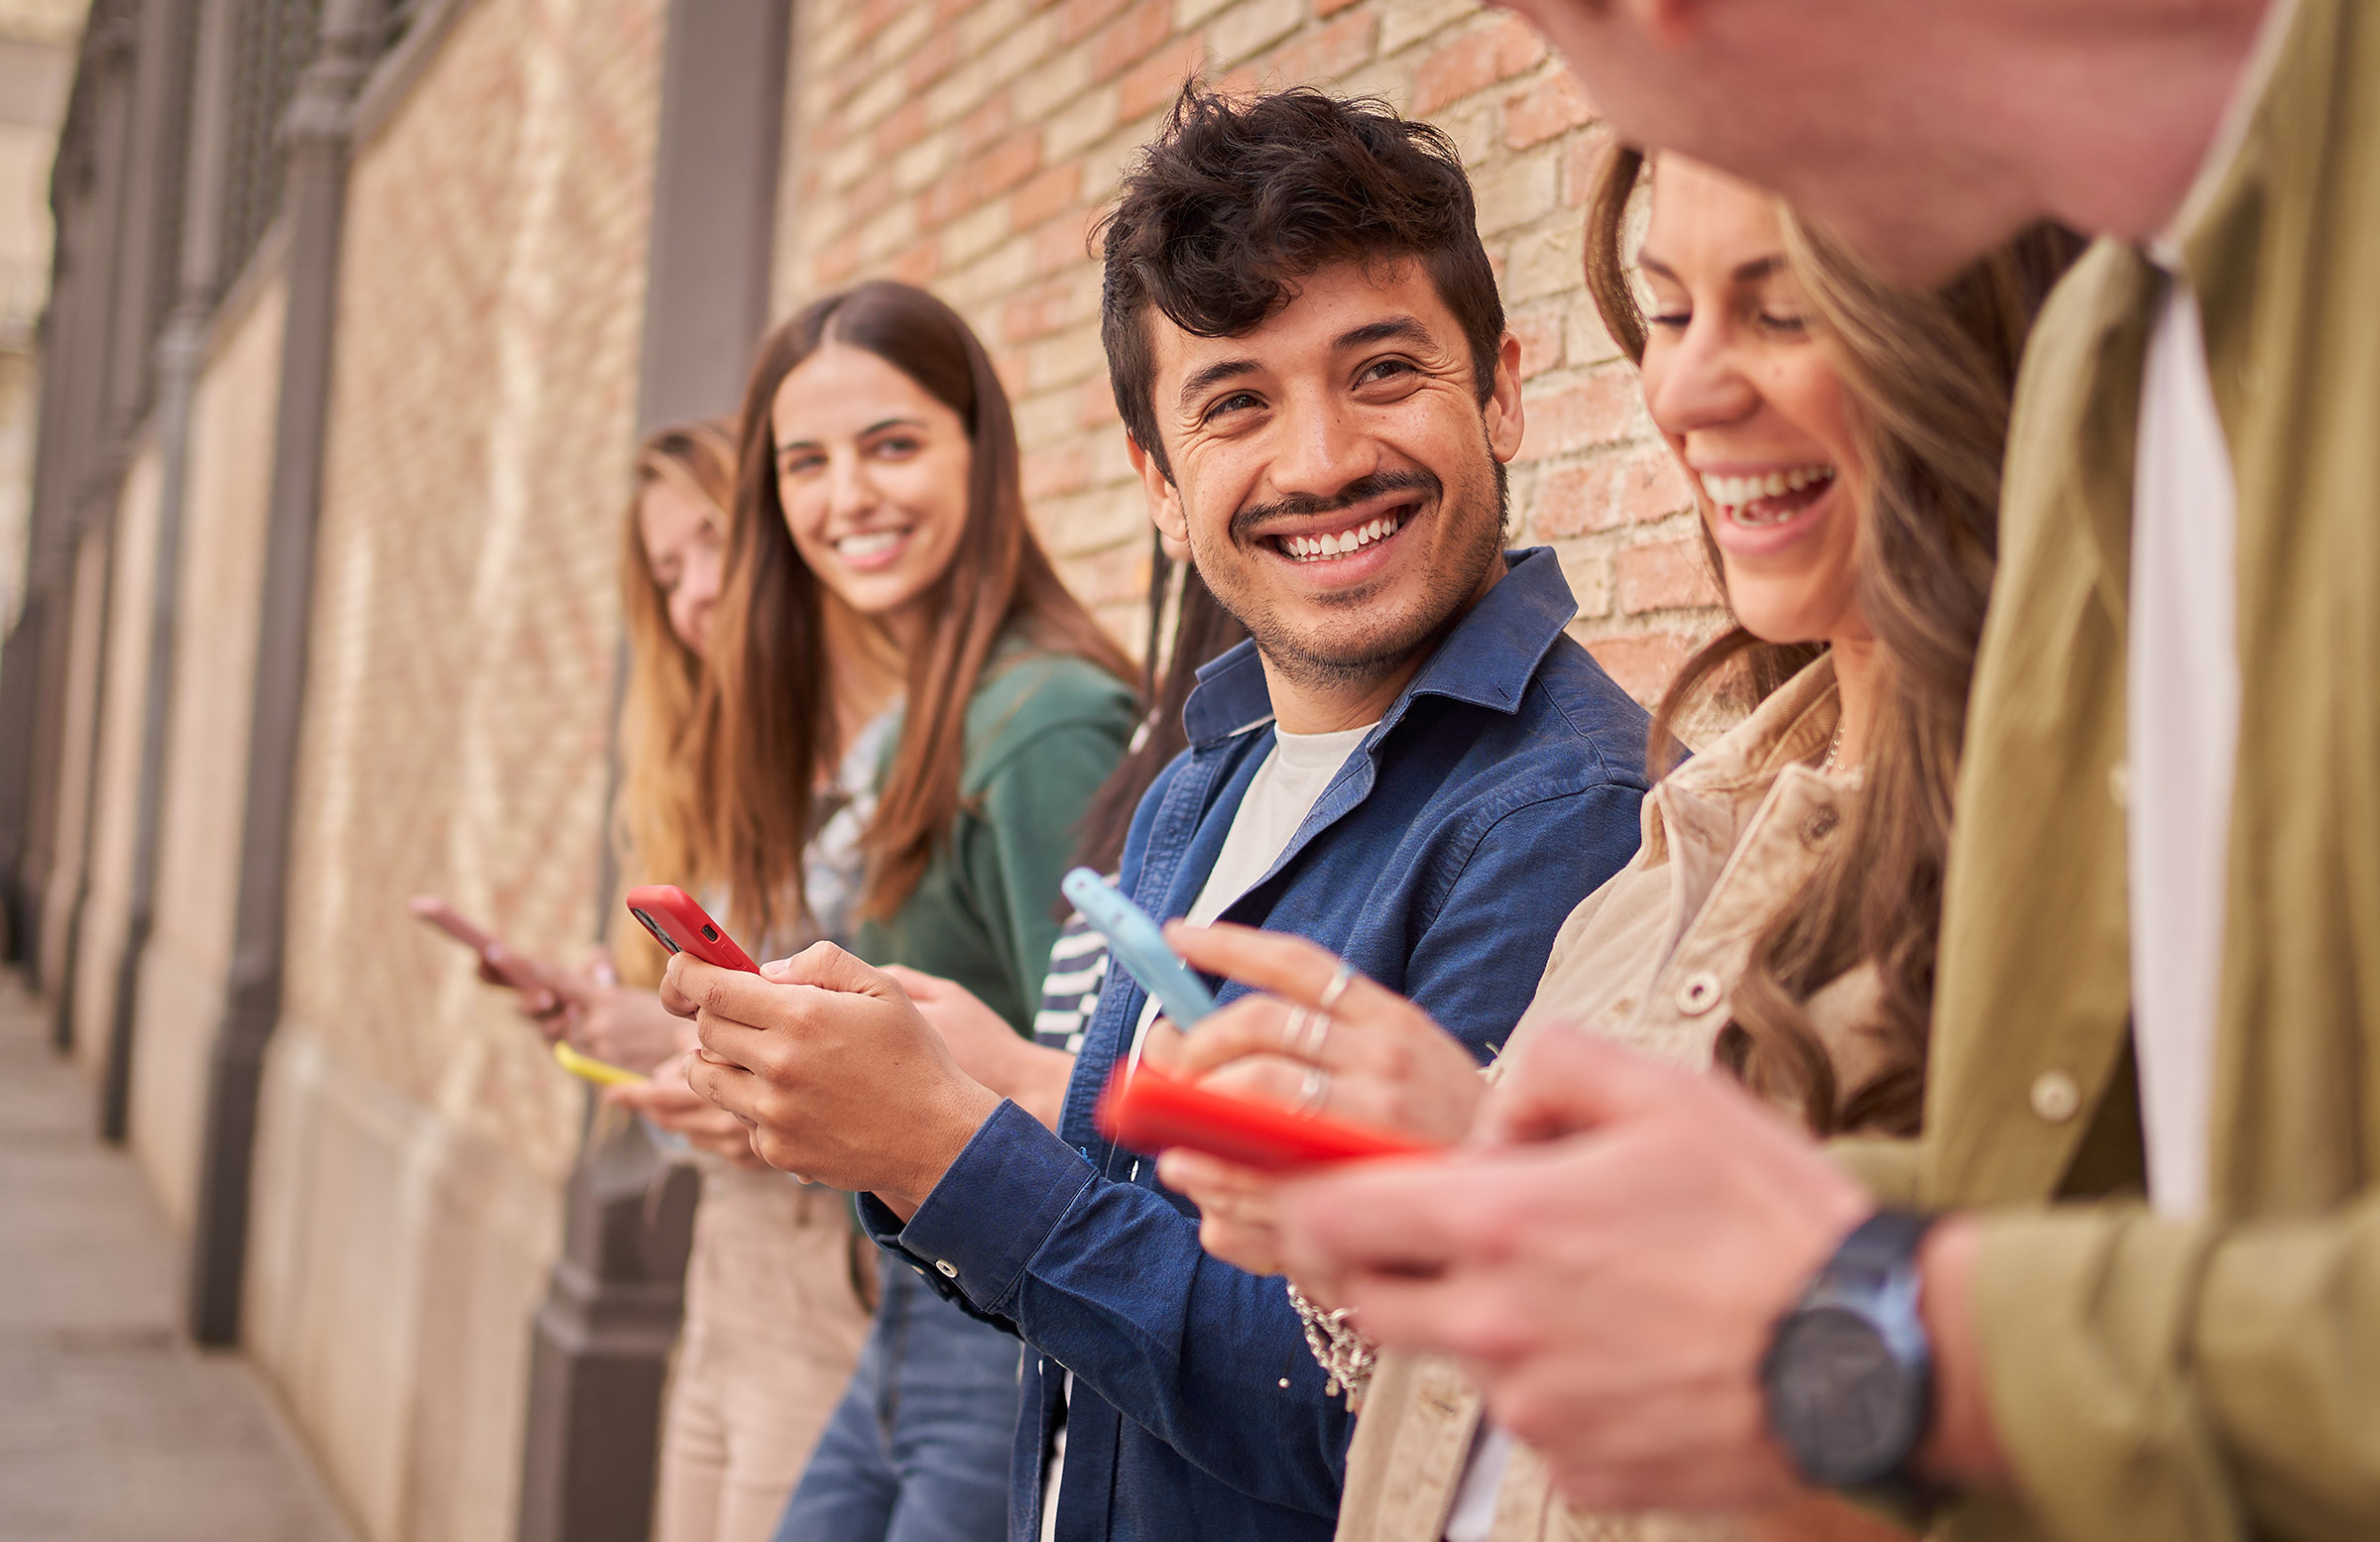 Group of multiracial young people with phones